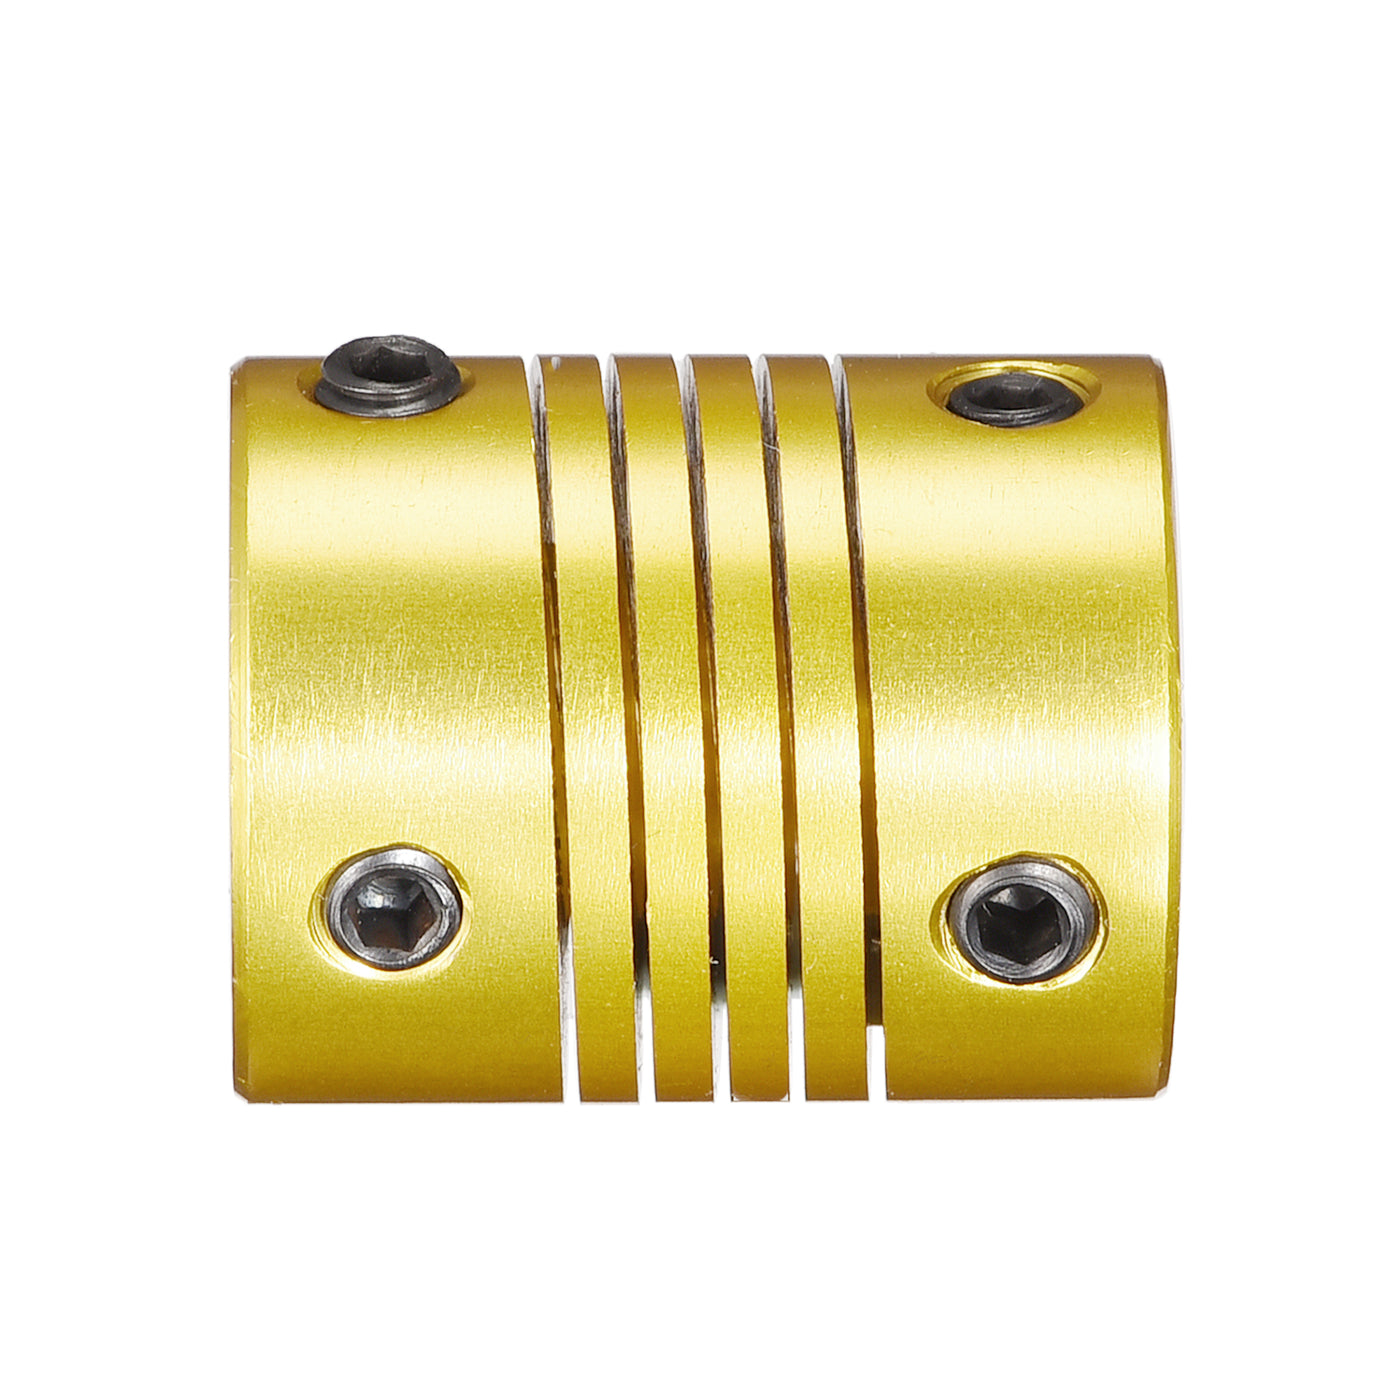 uxcell Uxcell 5 Pcs 10mm to 10mm Aluminum Alloy Shaft Coupling Flexible L25xD20 Golden Tone